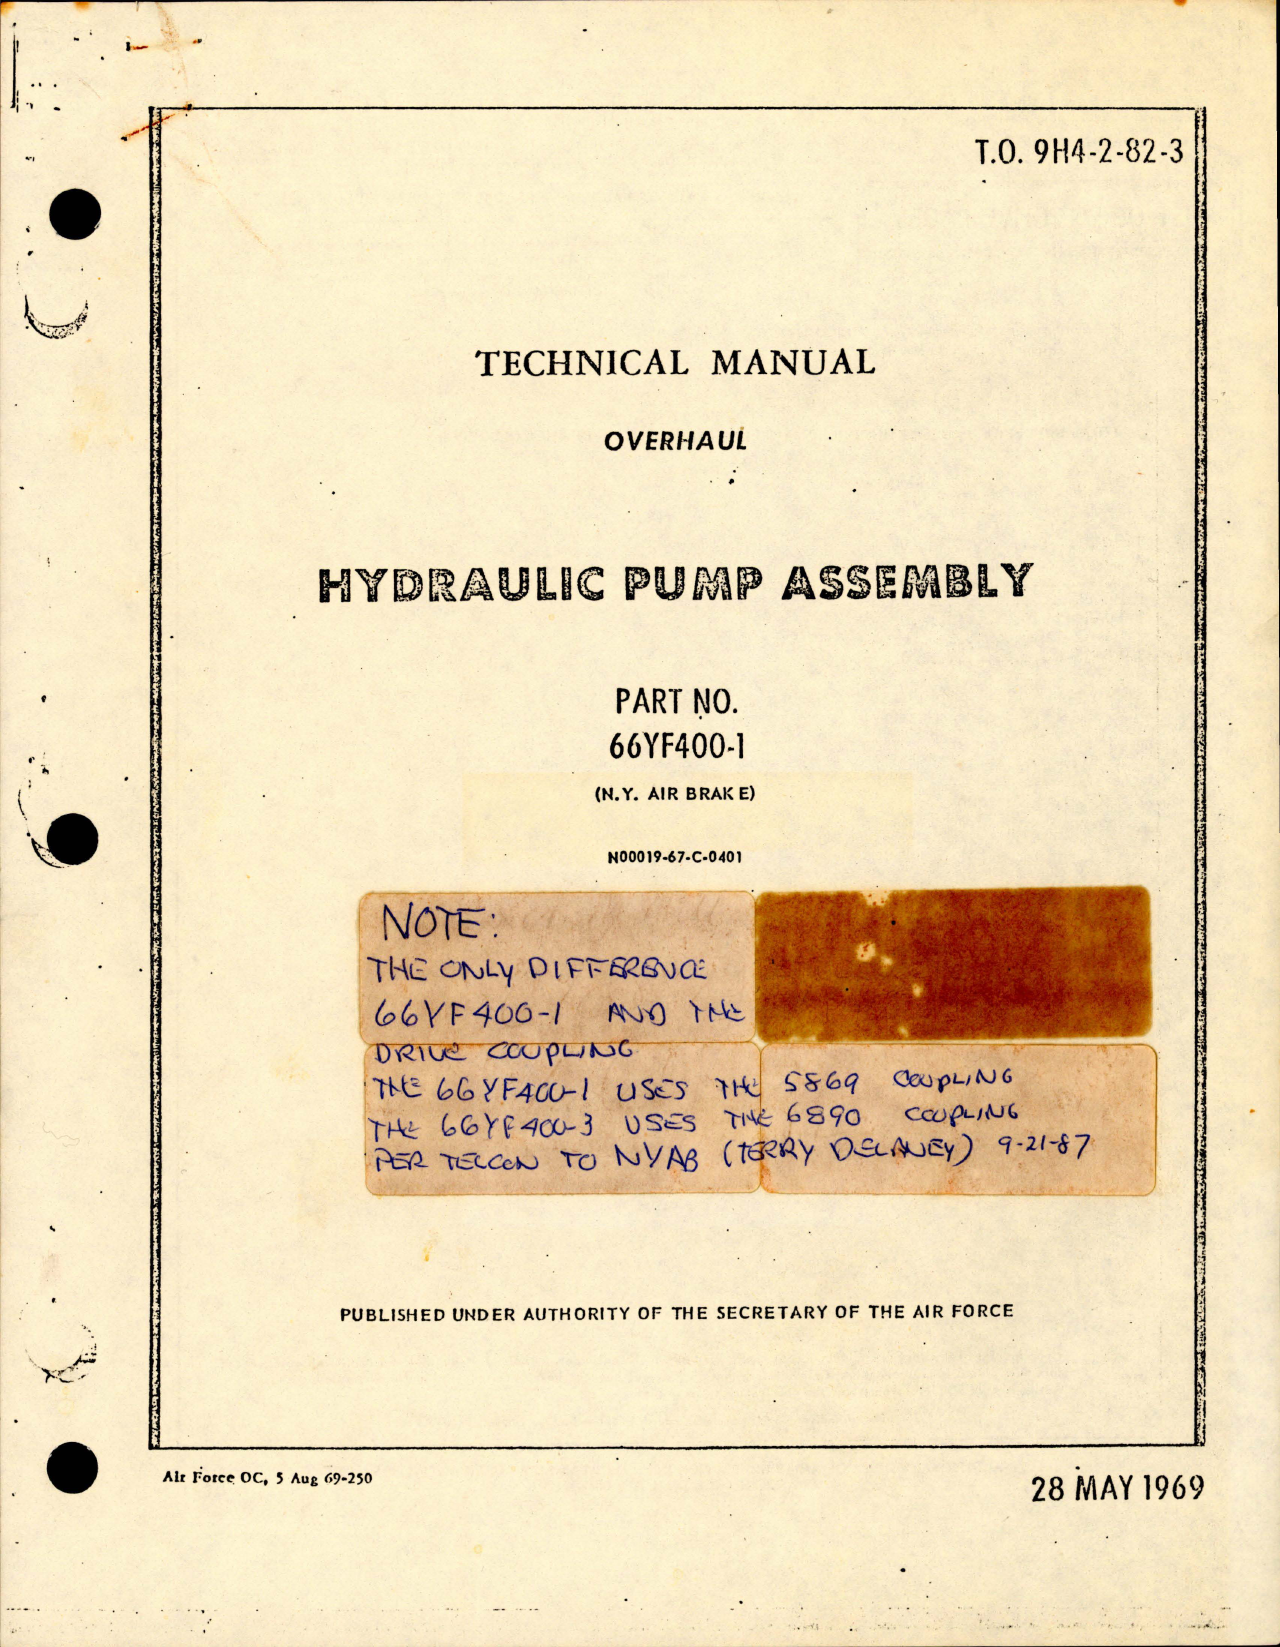 Sample page 1 from AirCorps Library document: Overhaul Manual for Hydraulic Pump Assembly - Part 66YF400-1 